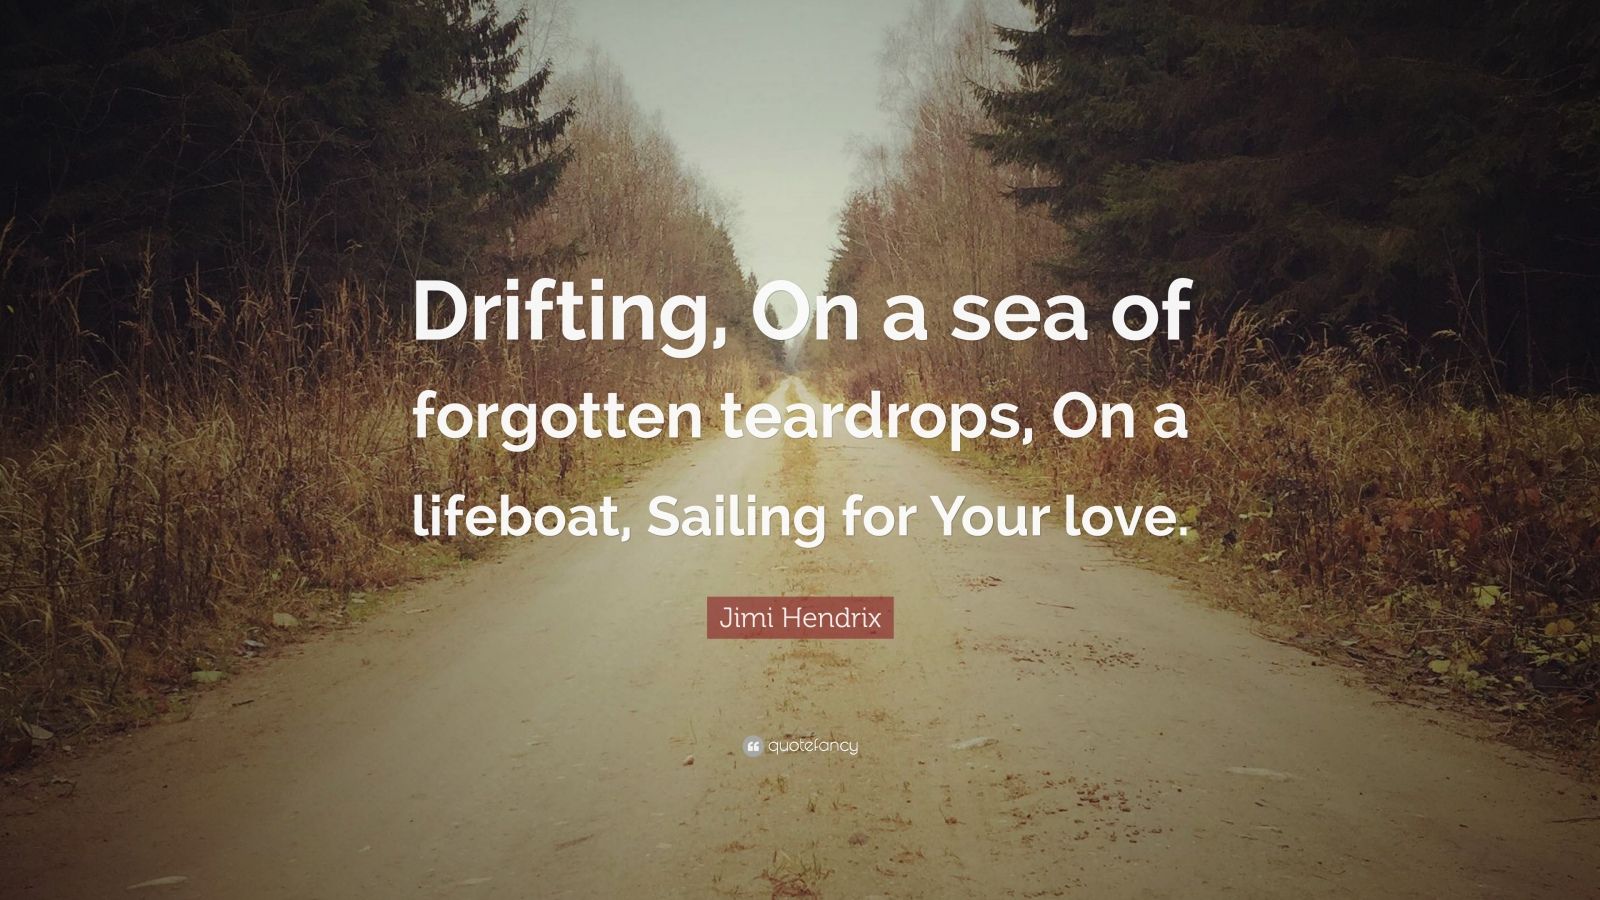 Jimi Hendrix Quote: "Drifting, On a sea of forgotten teardrops, On a lifeboat, Sailing for Your ...